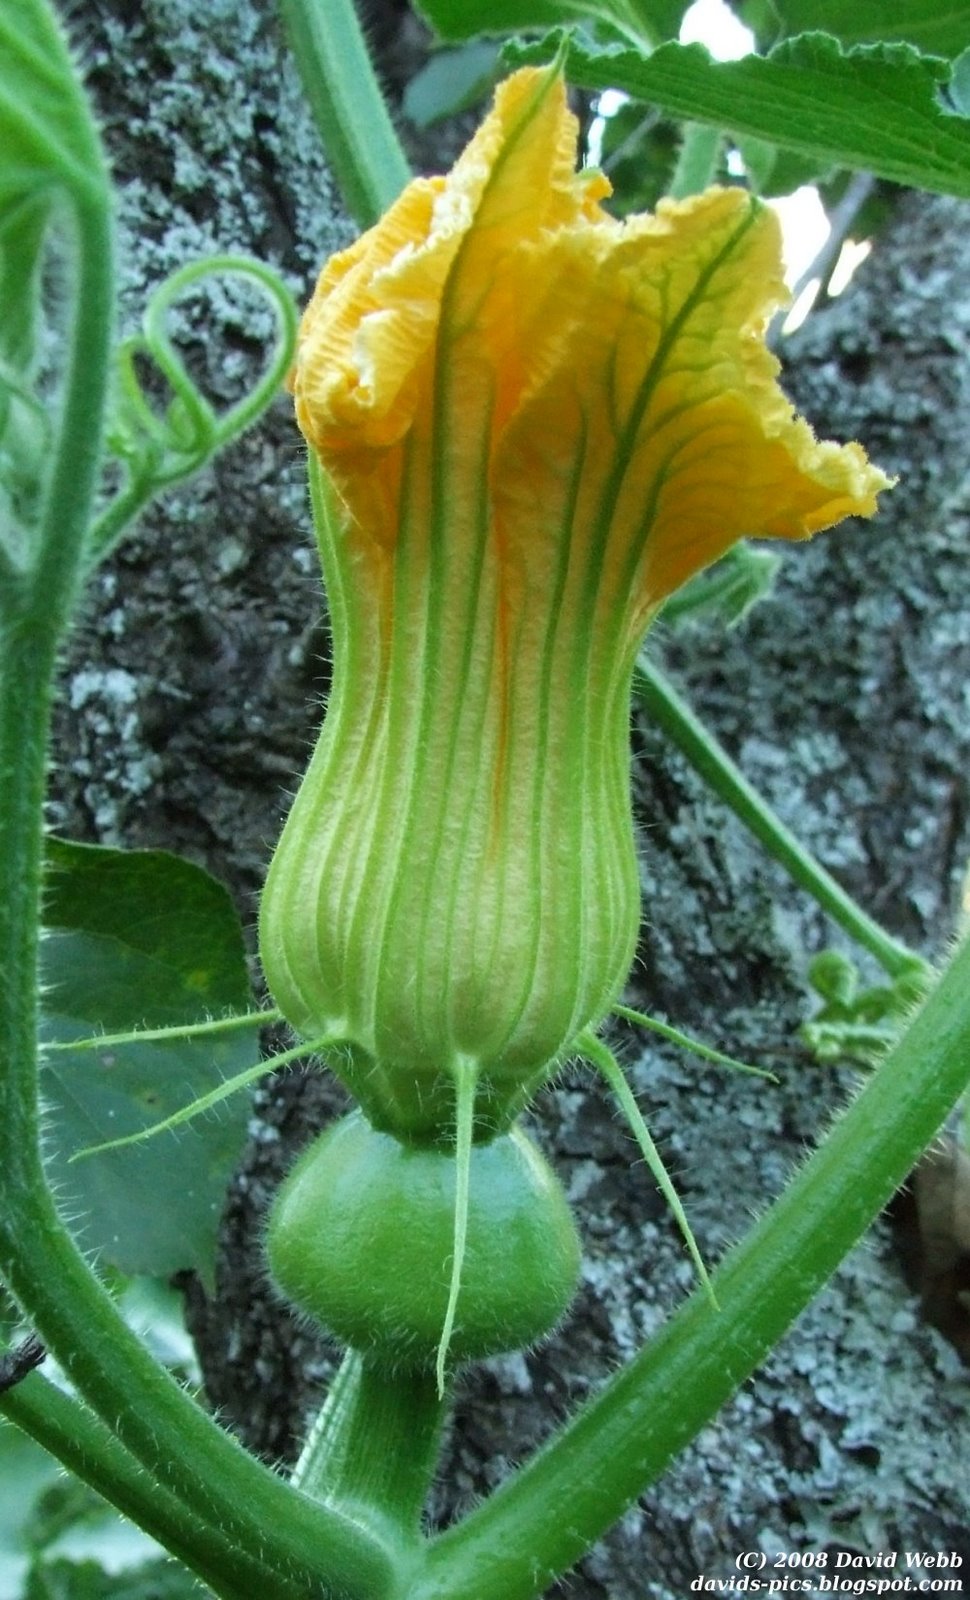 Yellow Pumpkin vine flower. This photo is from Spring, now quite a while ago in Australia. This Pumpkin Vine Flower was still opening, but the pumpkin itself had already started to grow. Notice the radiating spines sprouting just above the fruit - they make a nice decoration with the flower, almost like a medieval collar.